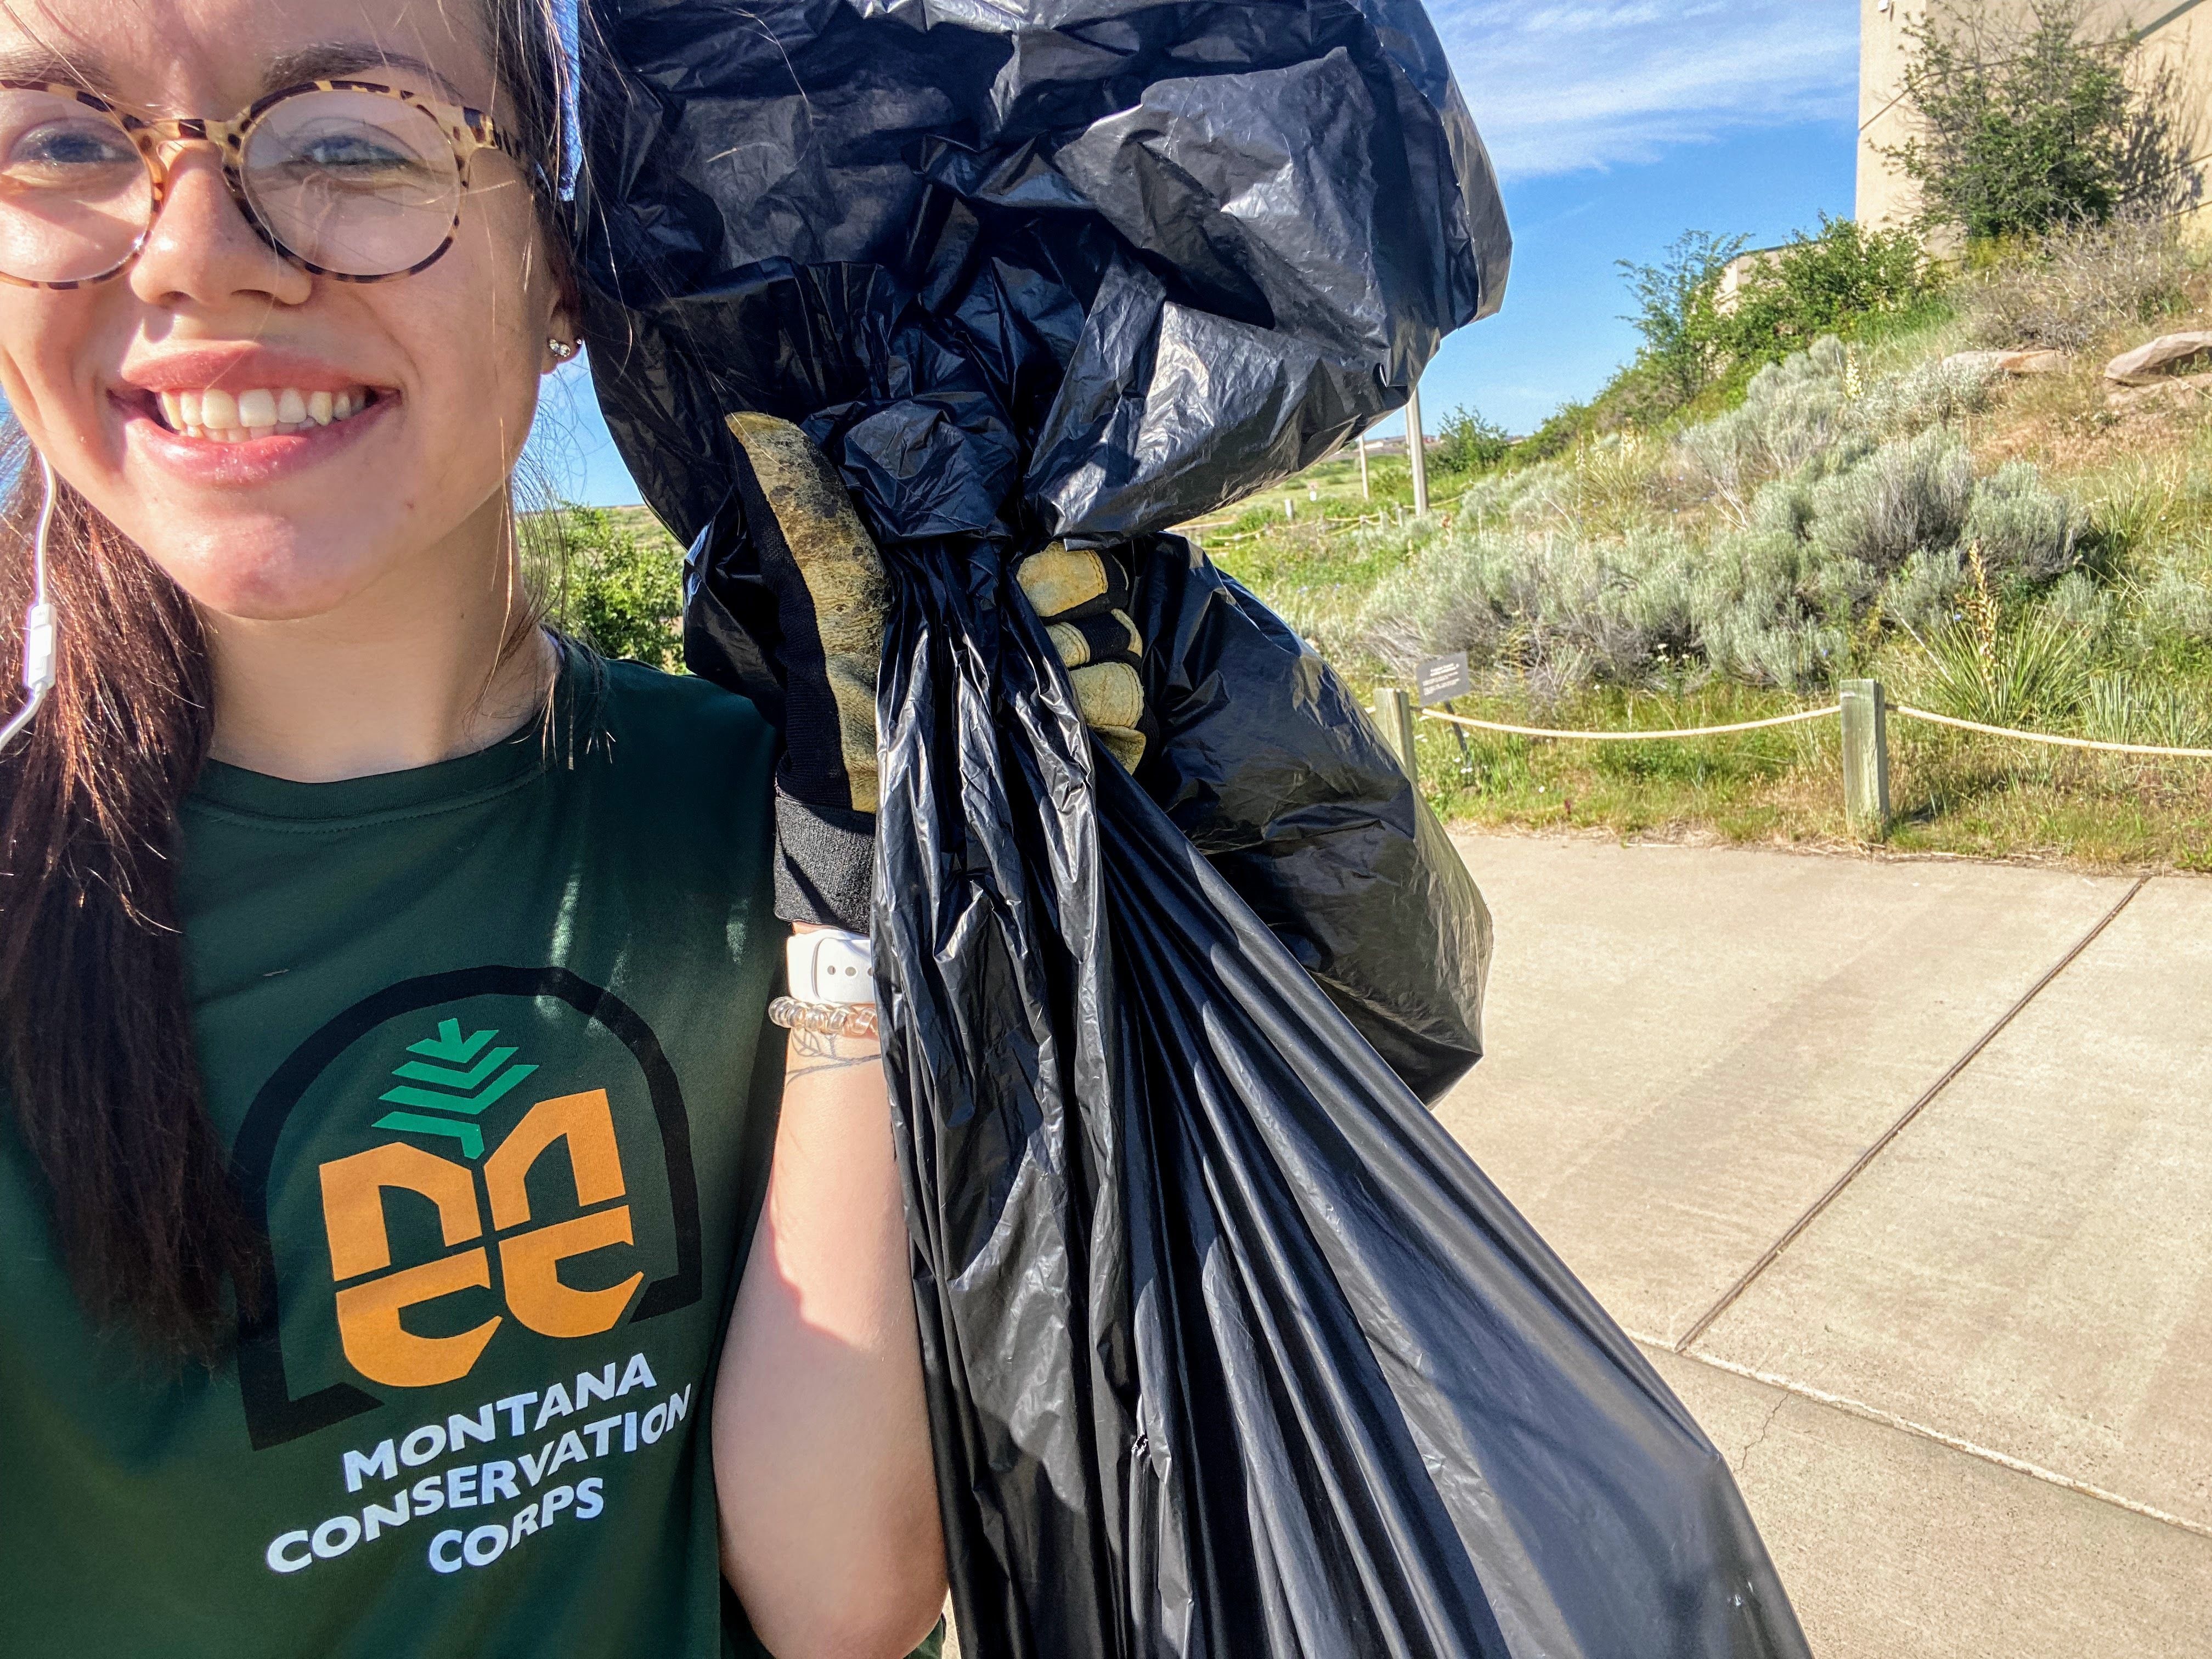 Lily holds a trashbag up next to her face and smiles at the camera. She is wearing a green shirt with an MCC logo.